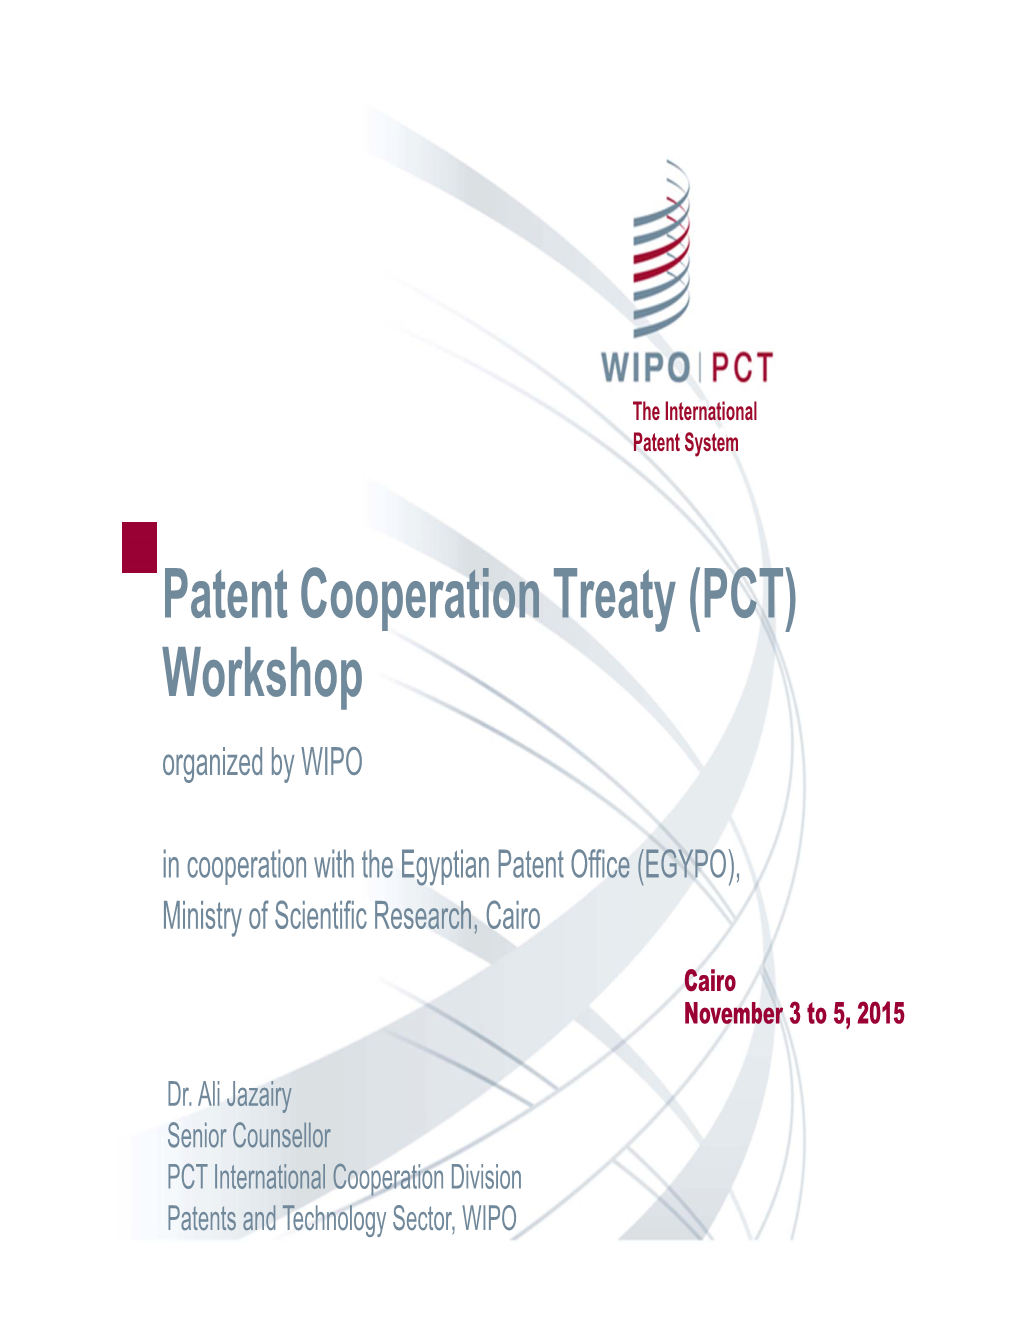 Patent Cooperation Treaty (PCT) Workshop Organized by WIPO in Cooperation with the Egyptian Patent Office (EGYPO), Ministry of Scientific Research, Cairo